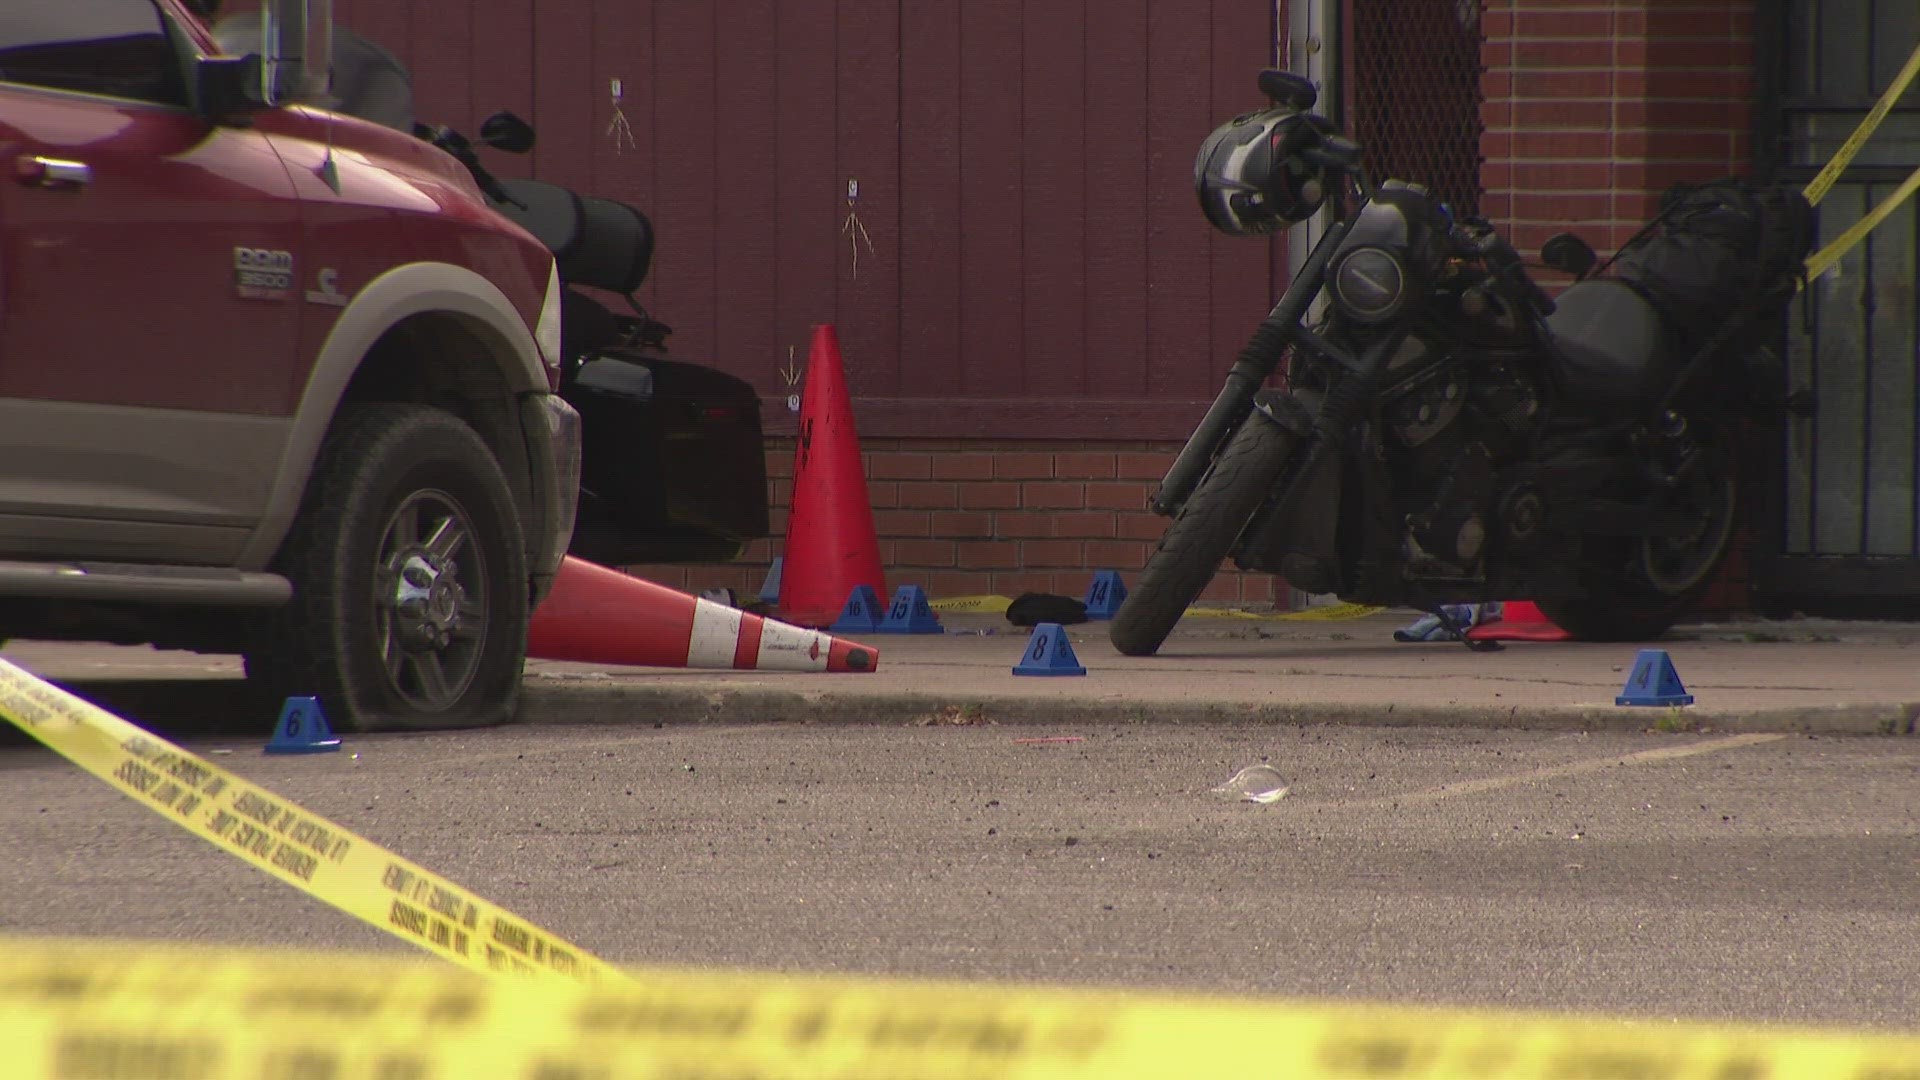 Two people were killed and five others were injured in a shooting at Hell's Lovers Motorcycle Club early Sunday morning.